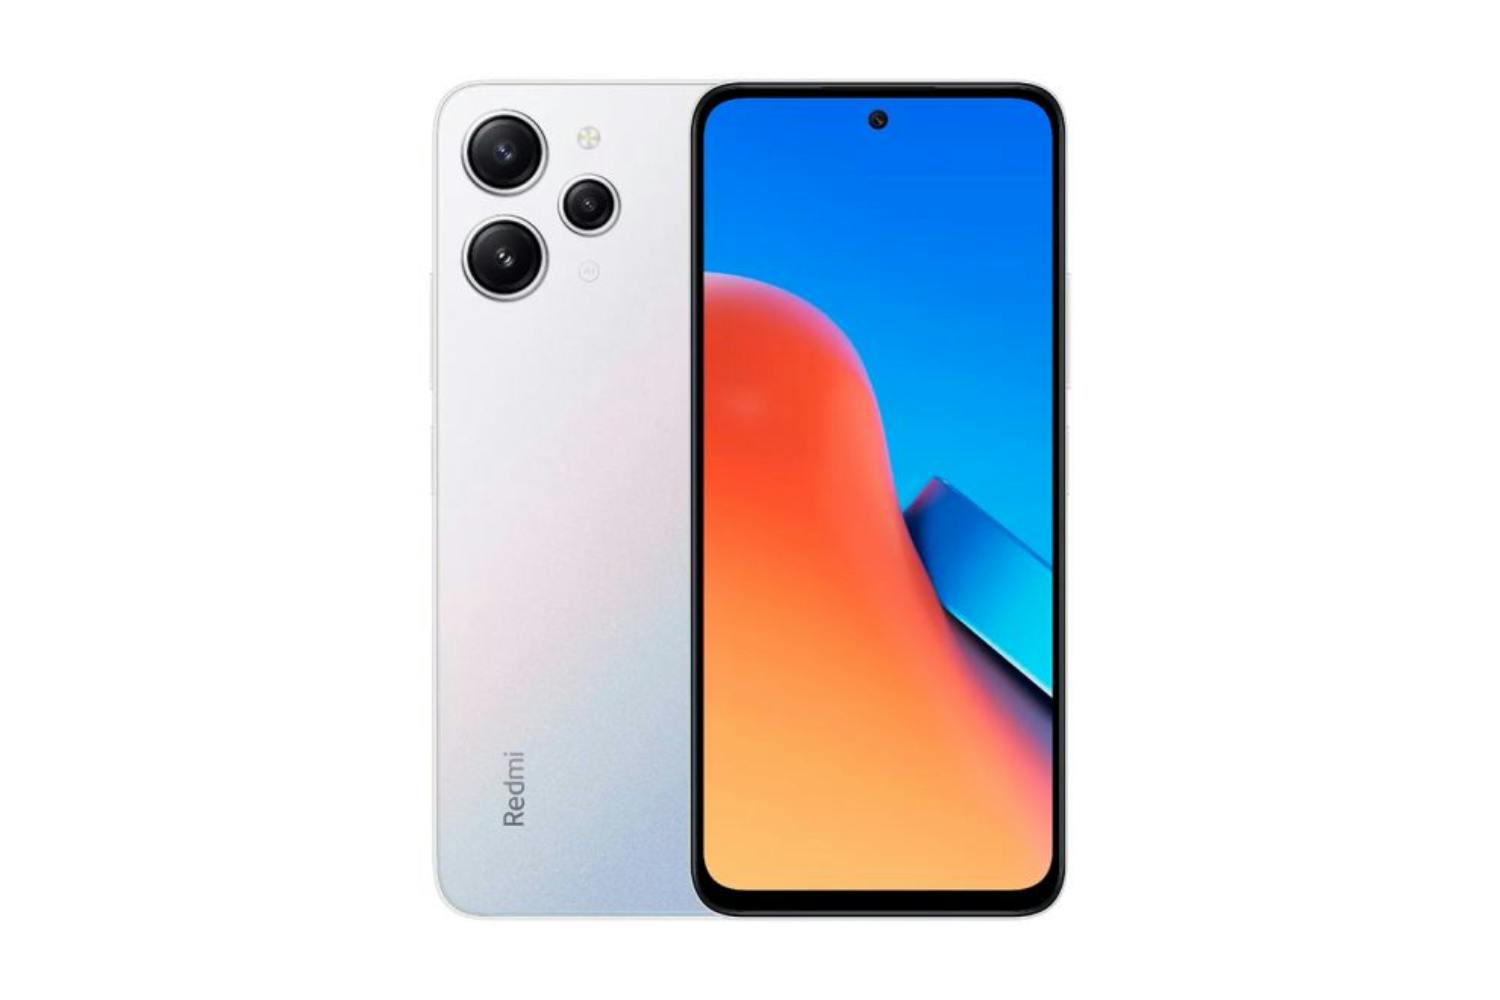 Xiaomi - Keep those weekend vibes going by popping in a